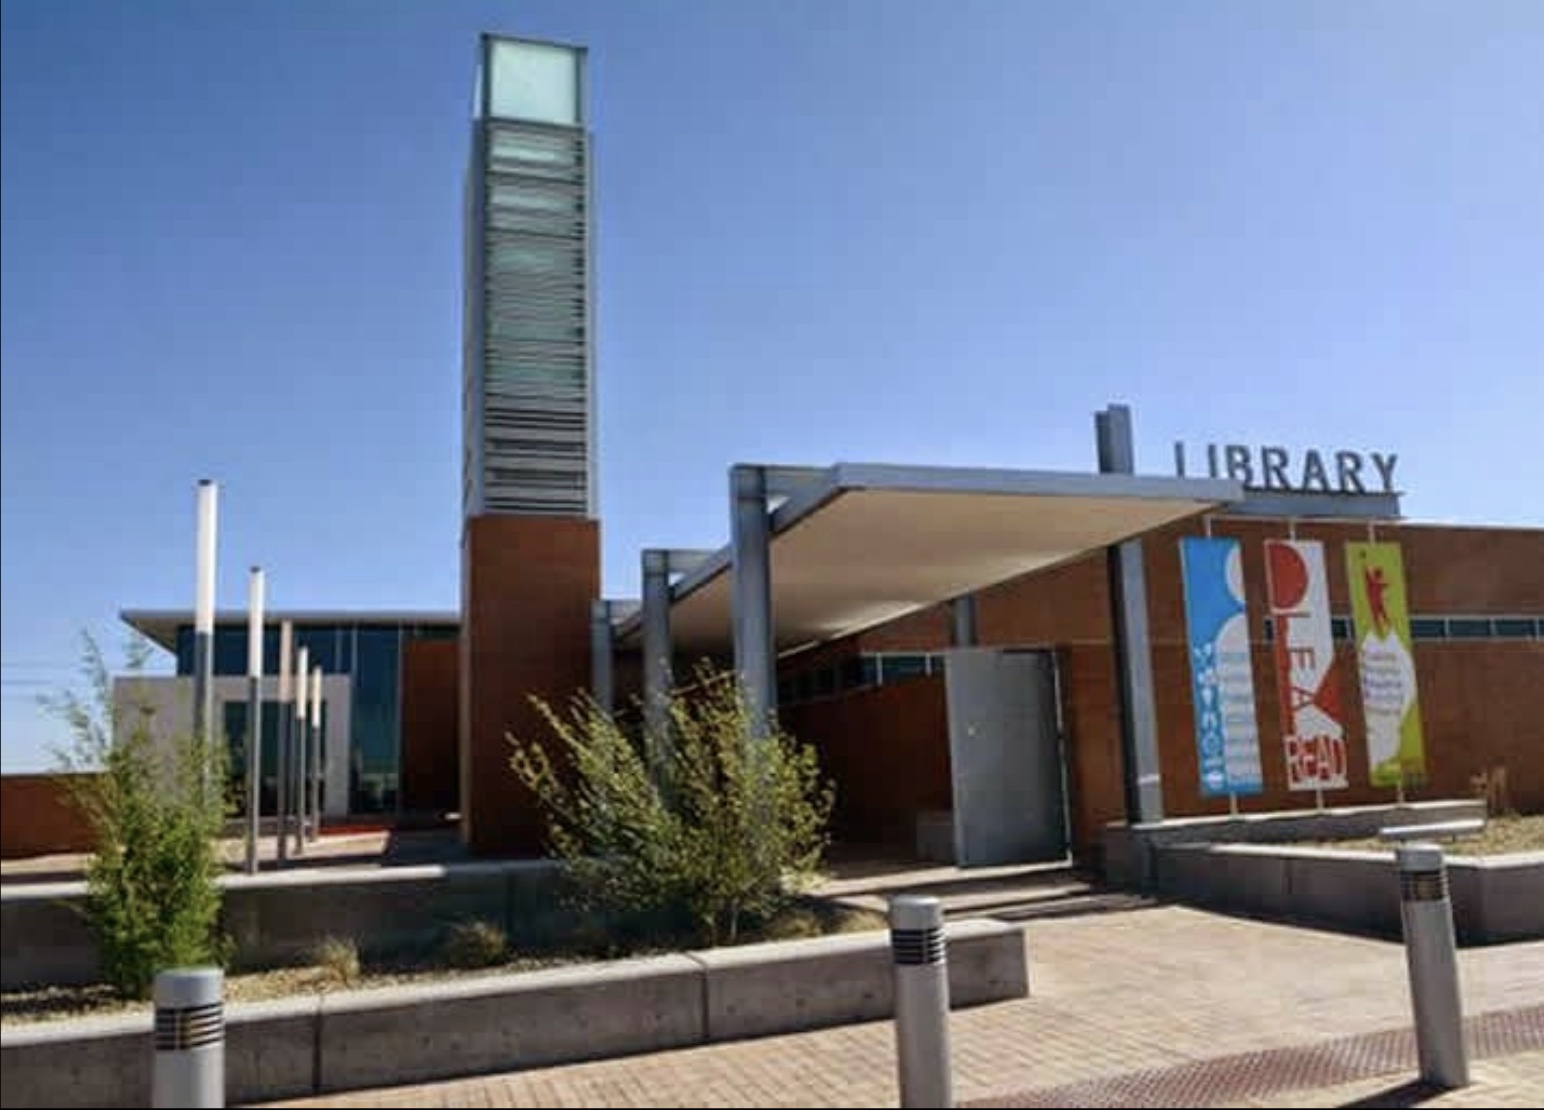 Central and Unser Public Library